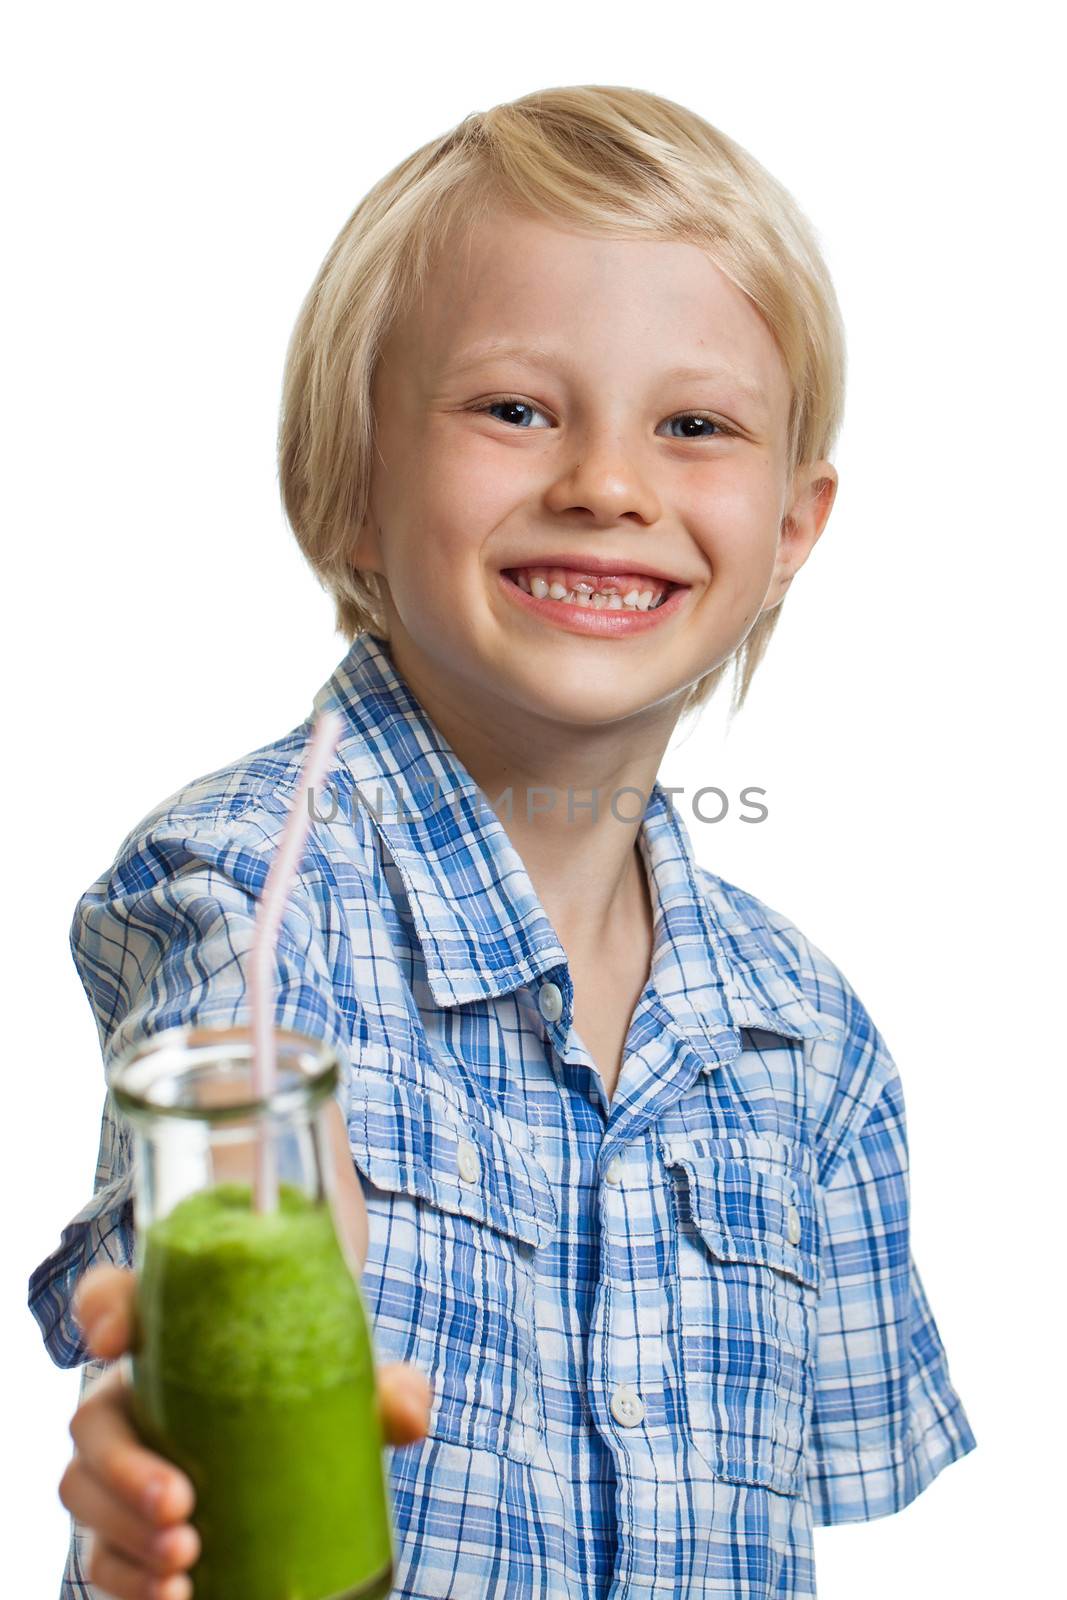 A cute healthy young boy holding a green smoothie or juice smiling. Isolated on white.